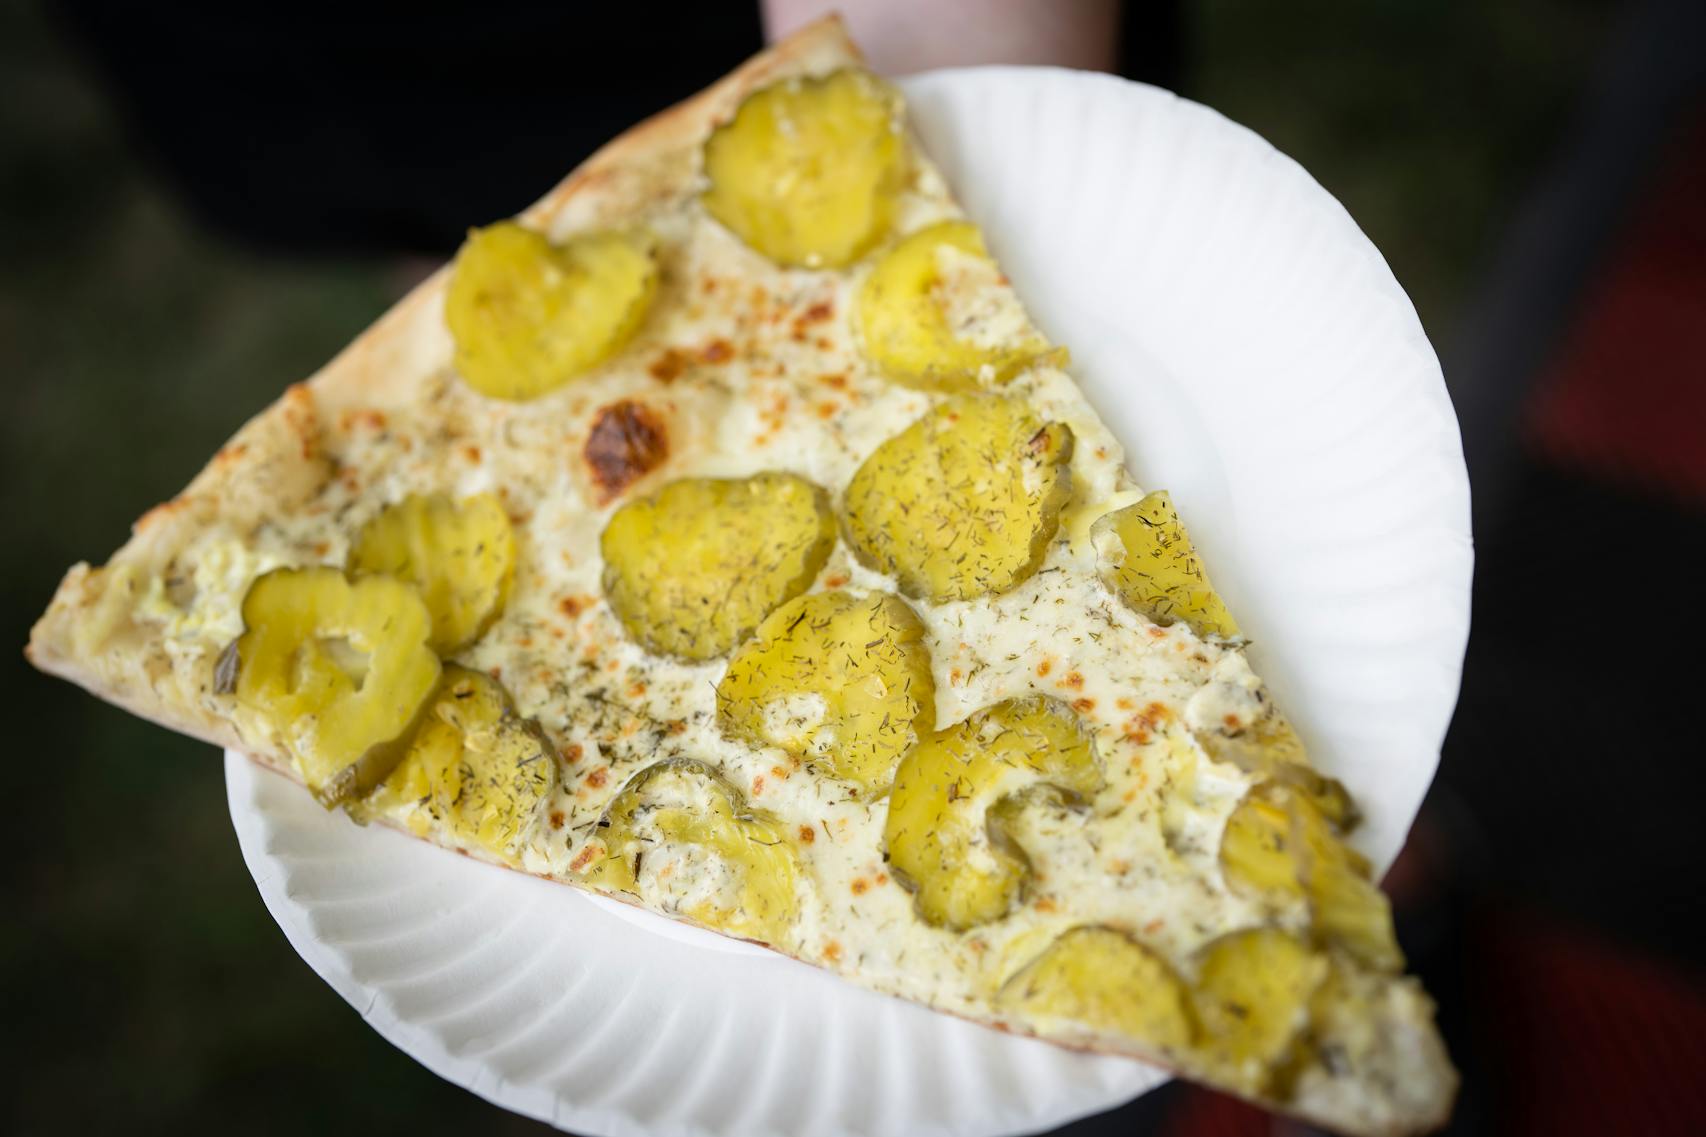 Pickle Pizza from Rick’s Pizza. New foods at the Minnesota State Fair photographed on Thursday, Aug. 25, 2022 in Falcon Heights, Minn. ] RENEE JONES SCHNEIDER • renee.jones@startribune.com